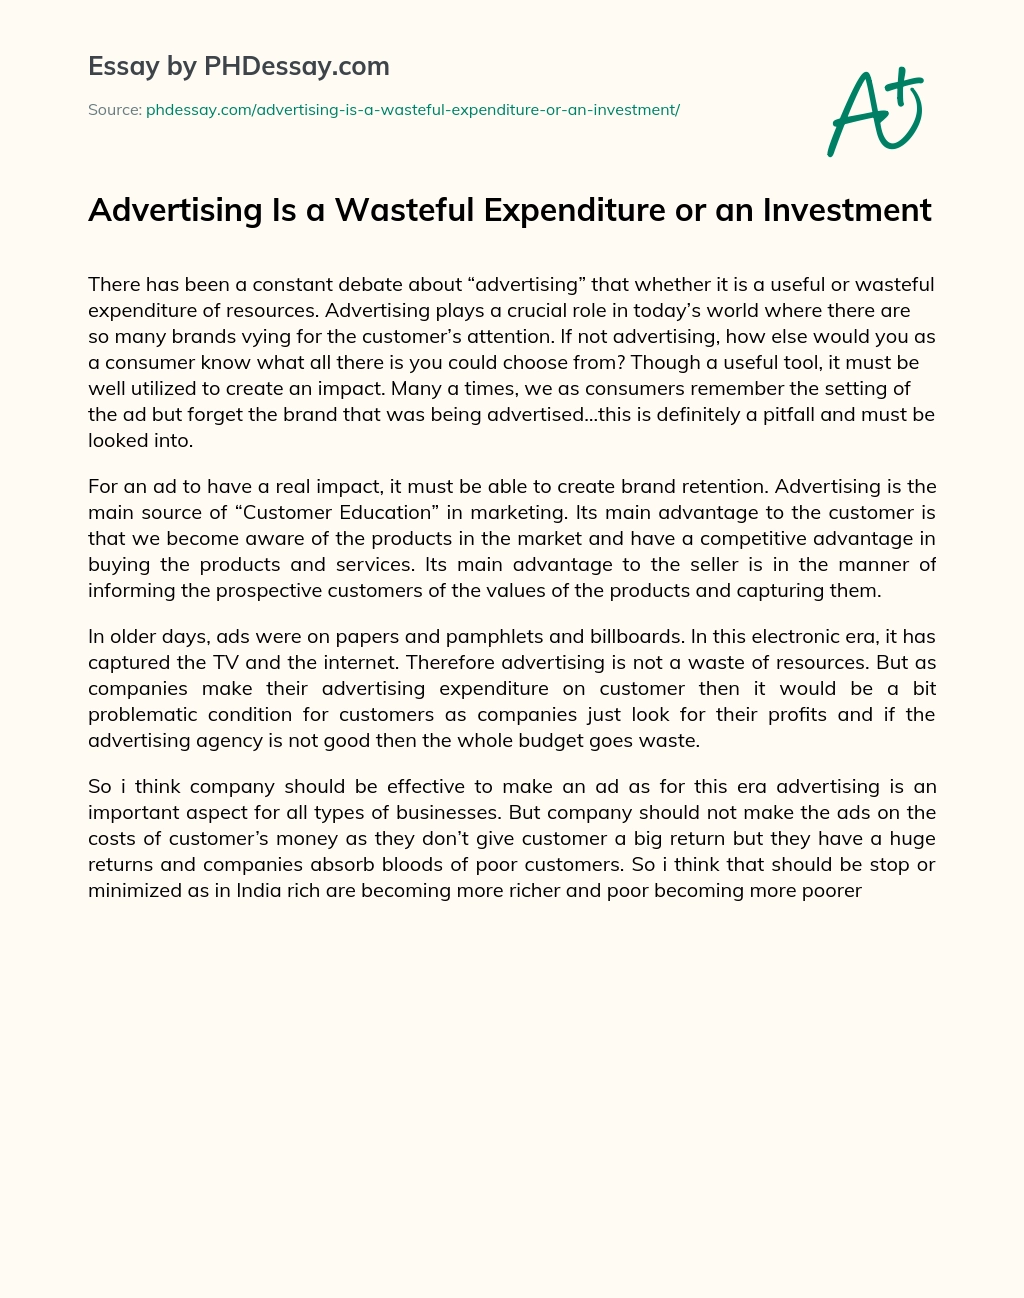 Advertising Is a Wasteful Expenditure or an Investment essay